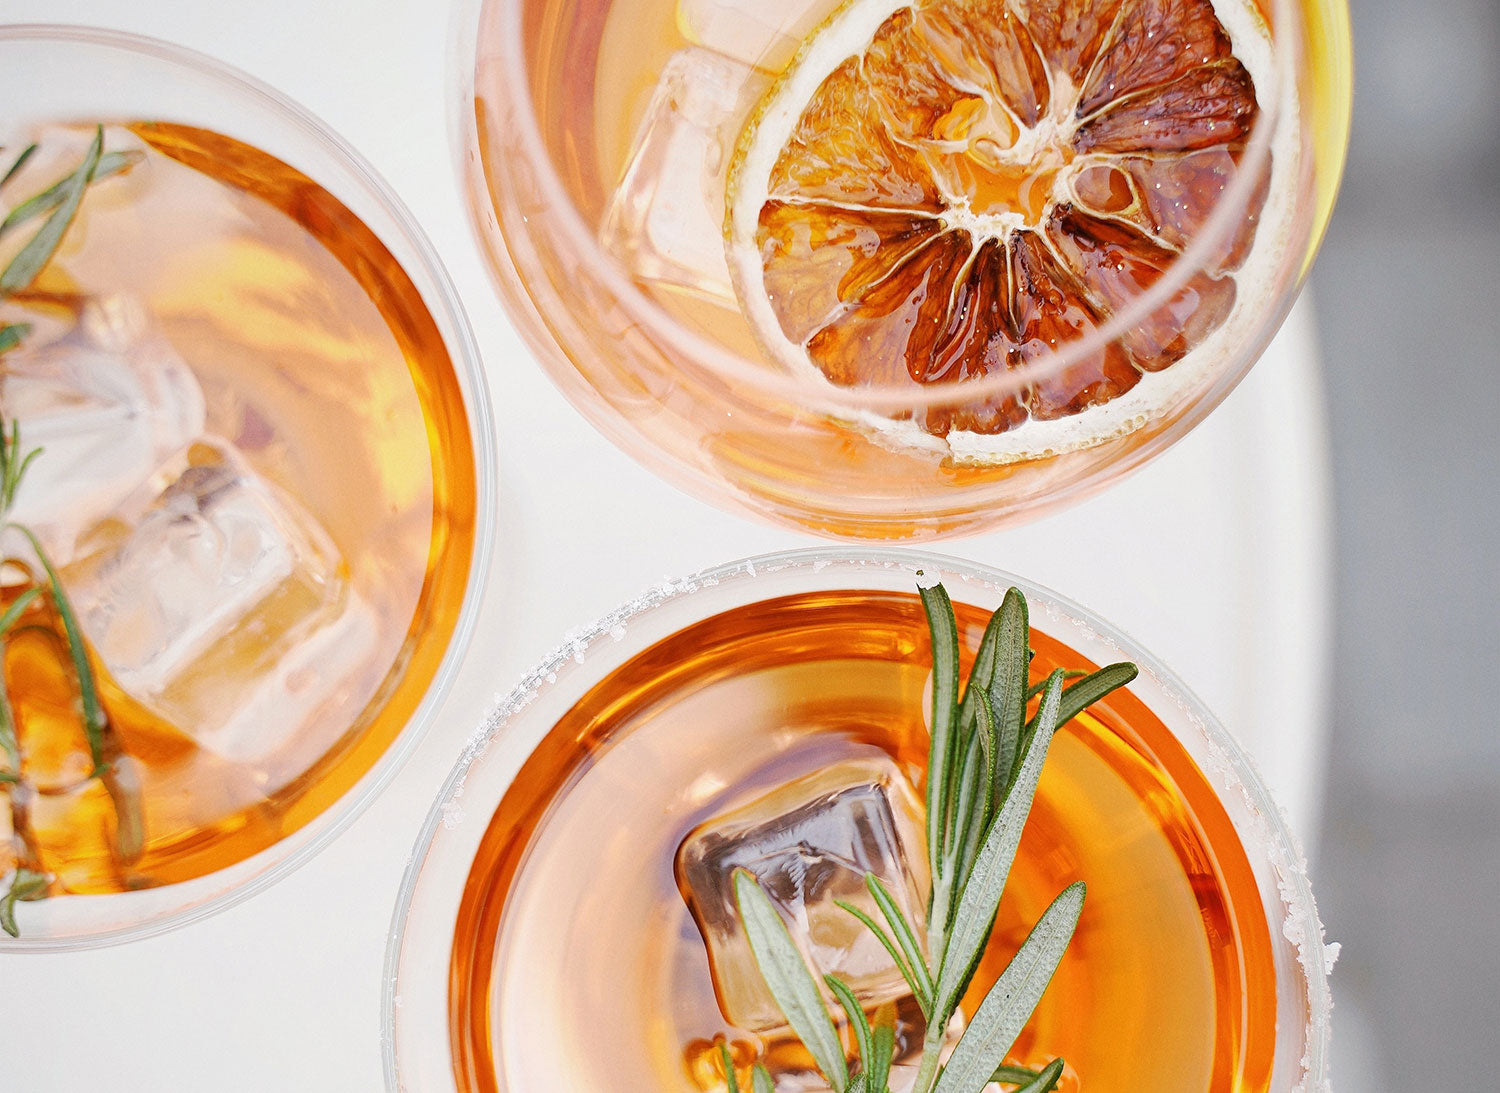 Sliced orange fruit, rosemary, and ice cubes in clear drinking glasses. Image by Olena Bohovyk